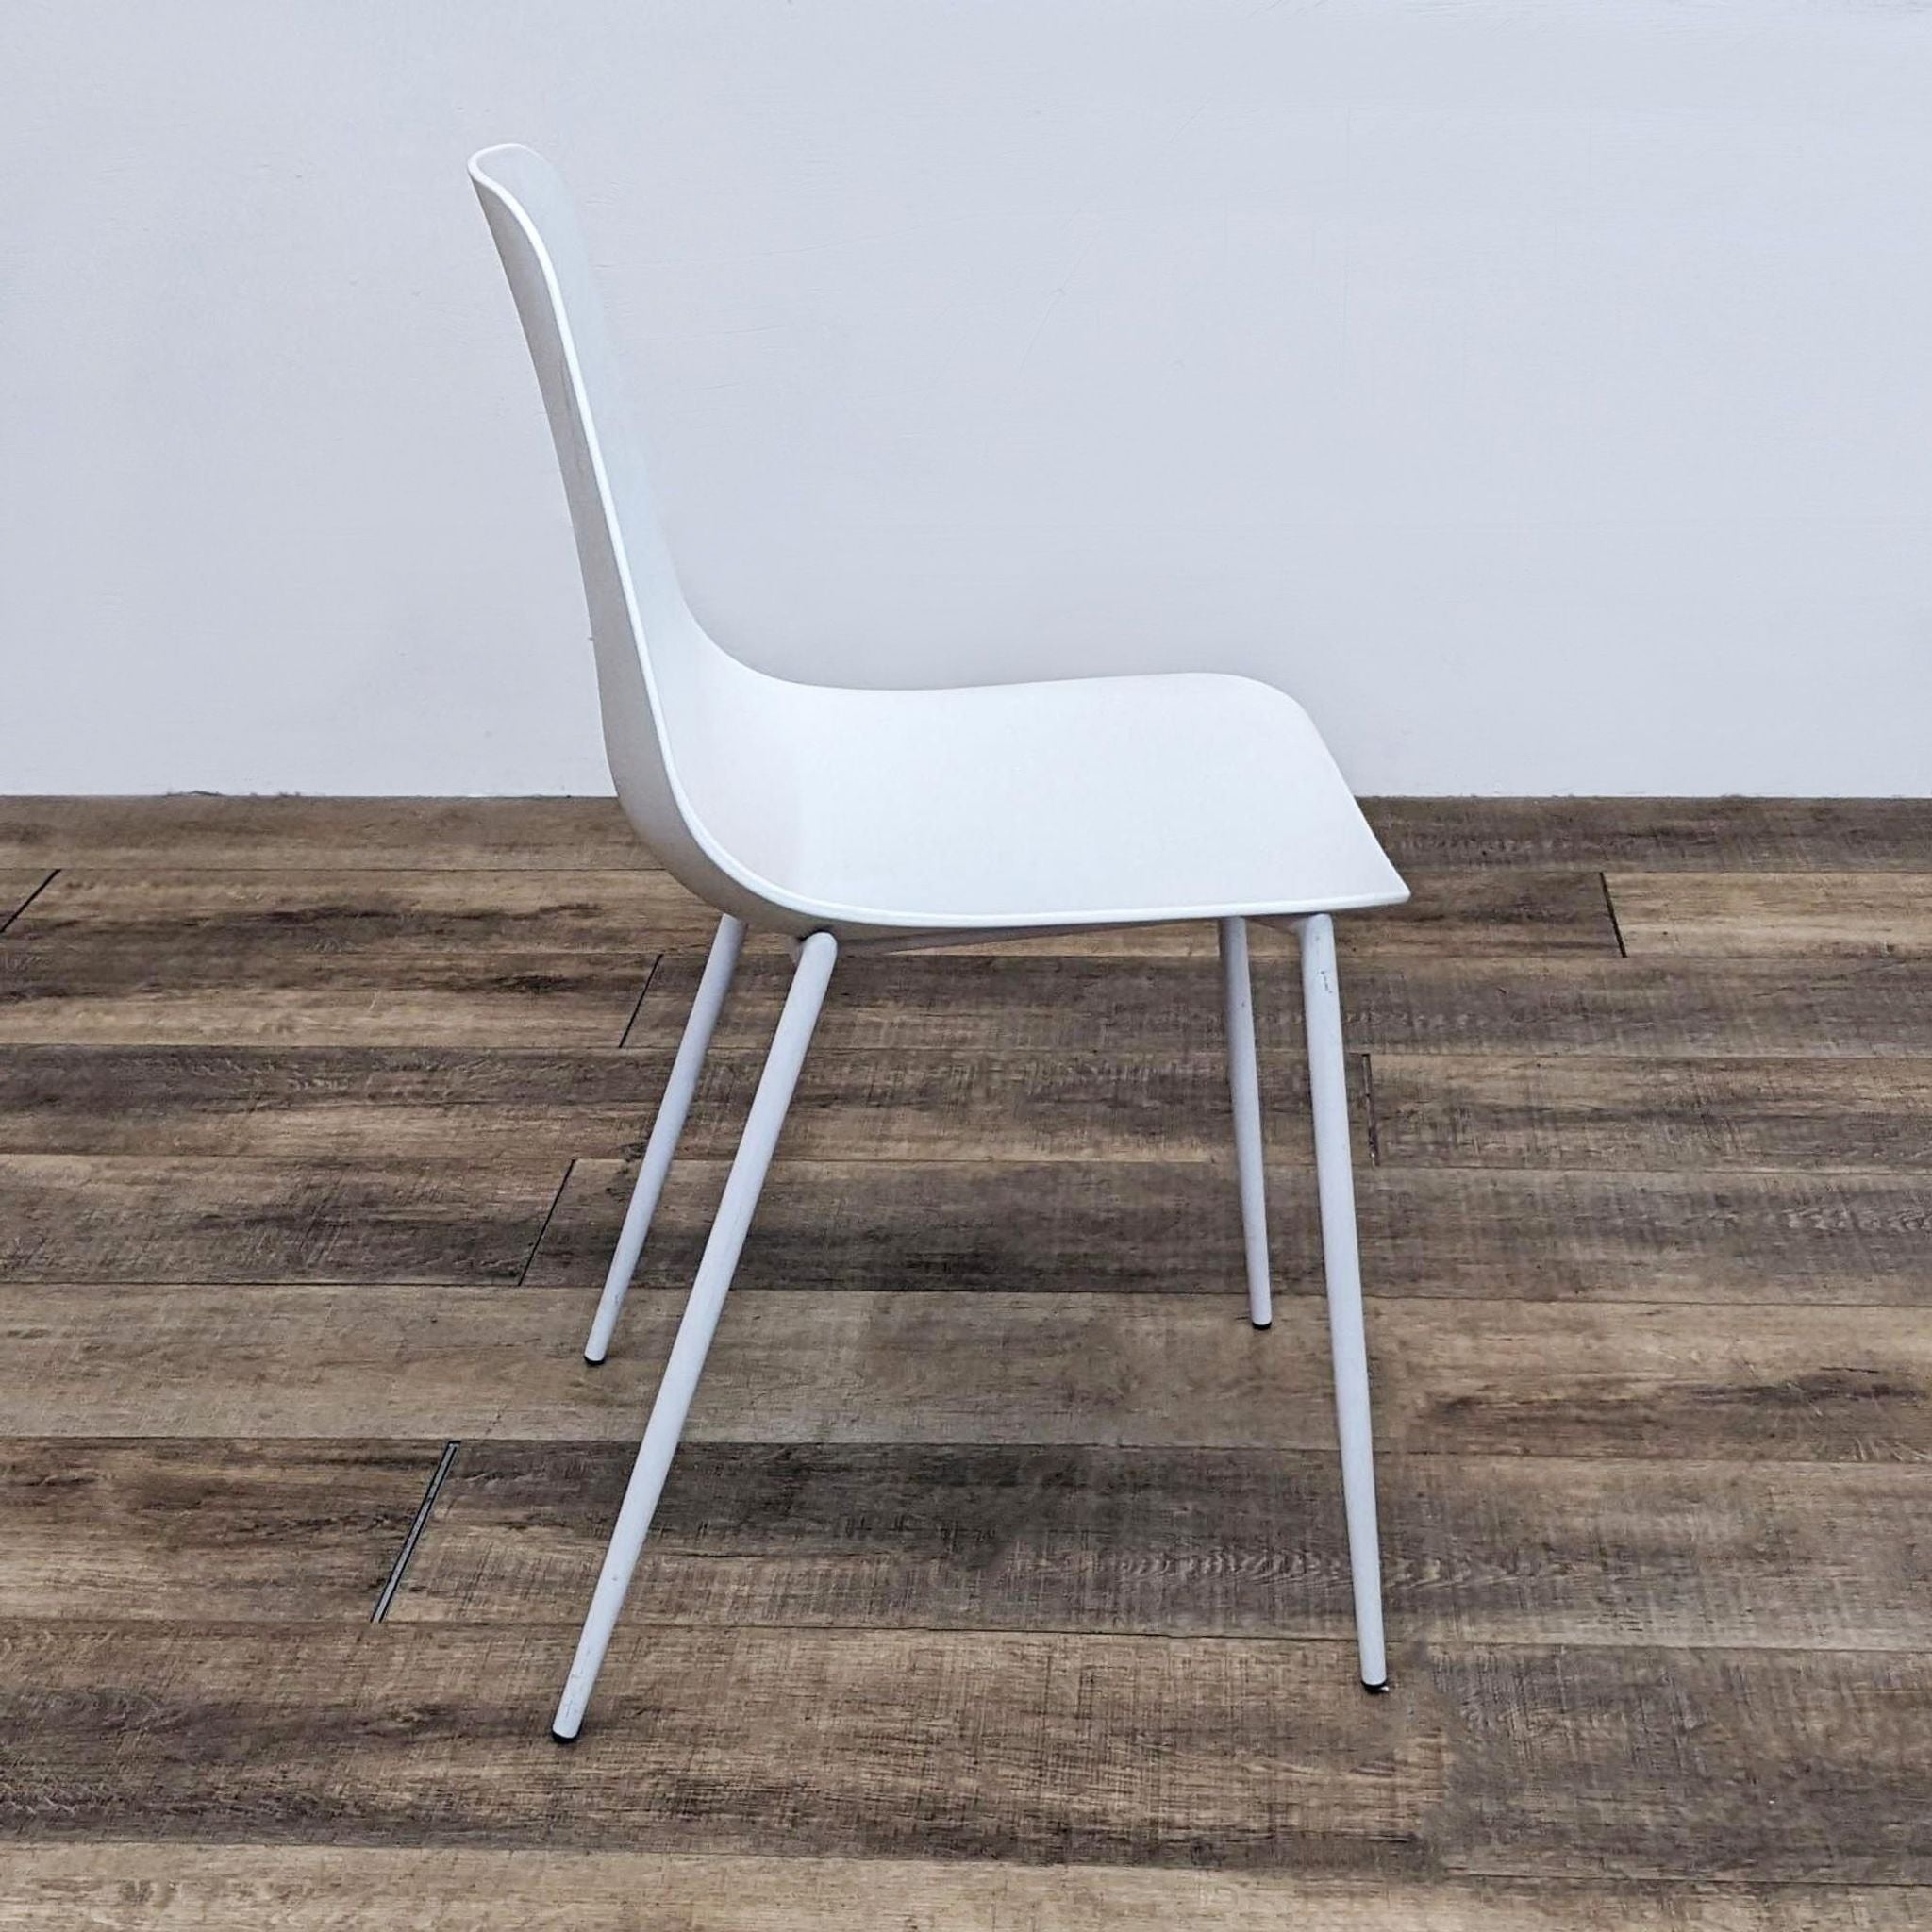 Angled view of white Reperch polypropylene side chair with slender legs, wooden floor backdrop.